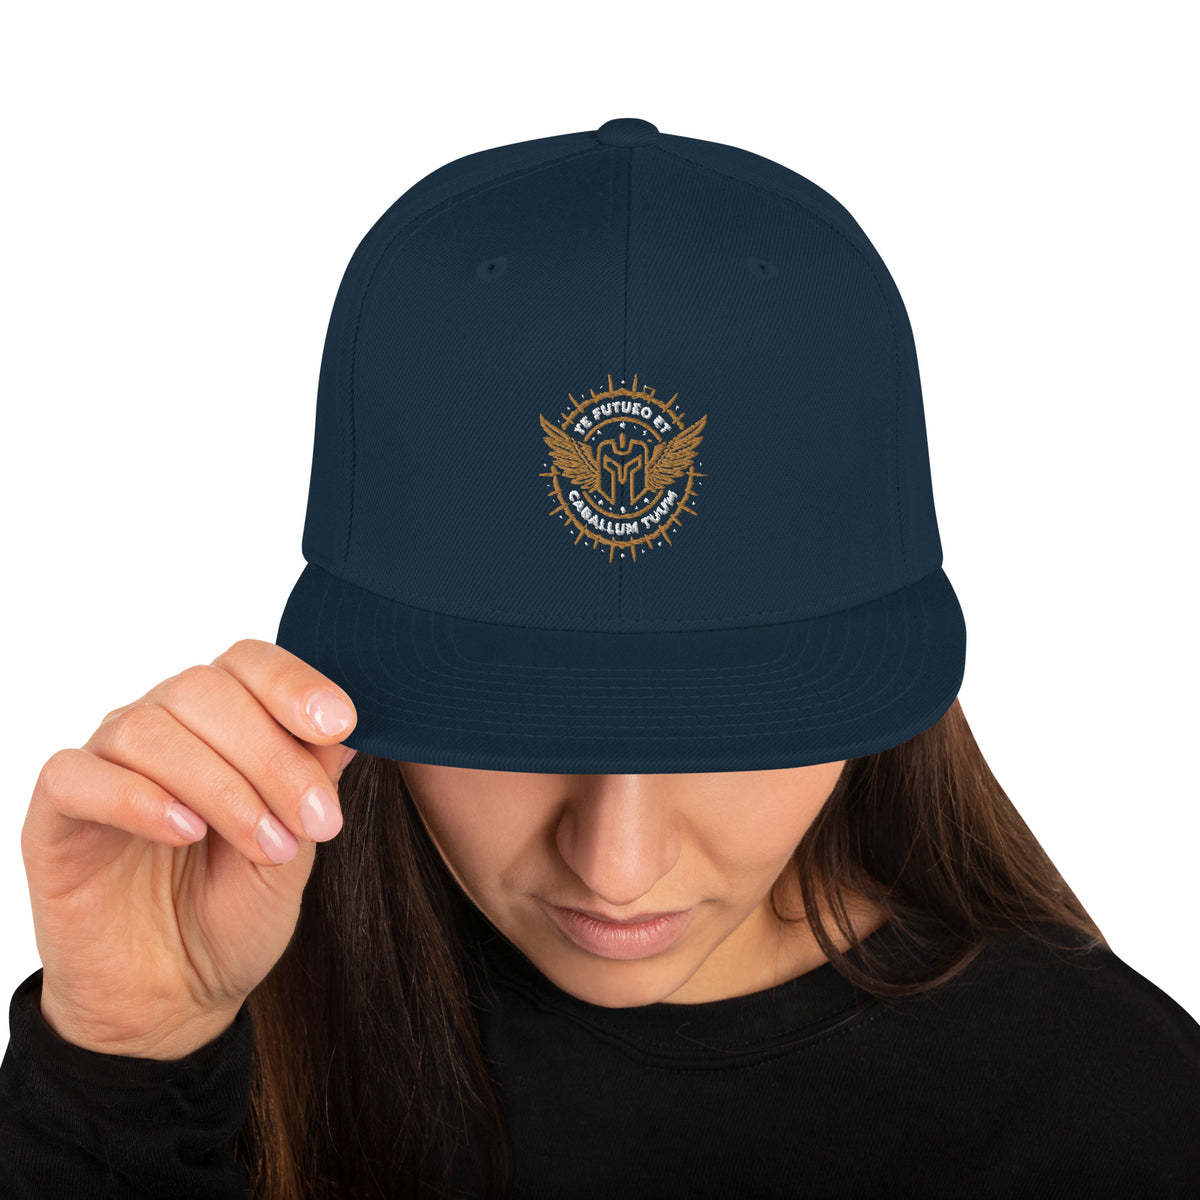 Te Futueo et Caballum Tuum (Latin - Screw you, and the horse you rode in on) Snapback Hat